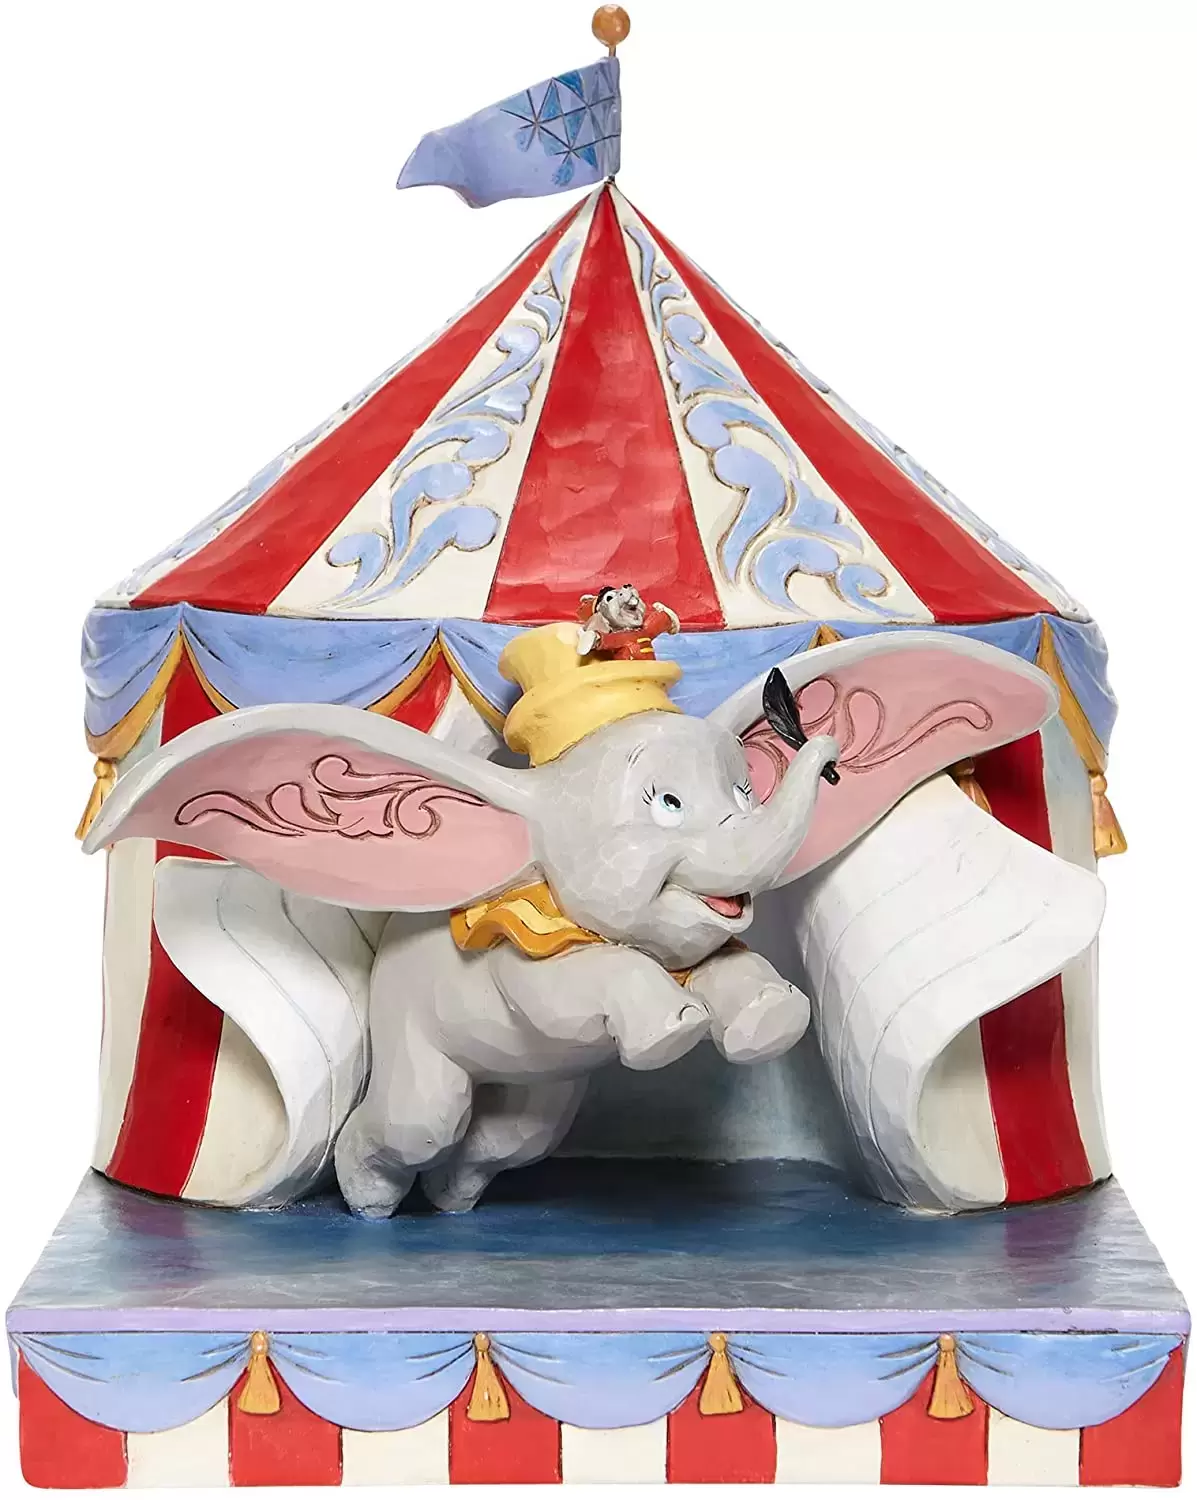 Disney Traditions by Jim Shore - Dumbo Flying Out of Tent